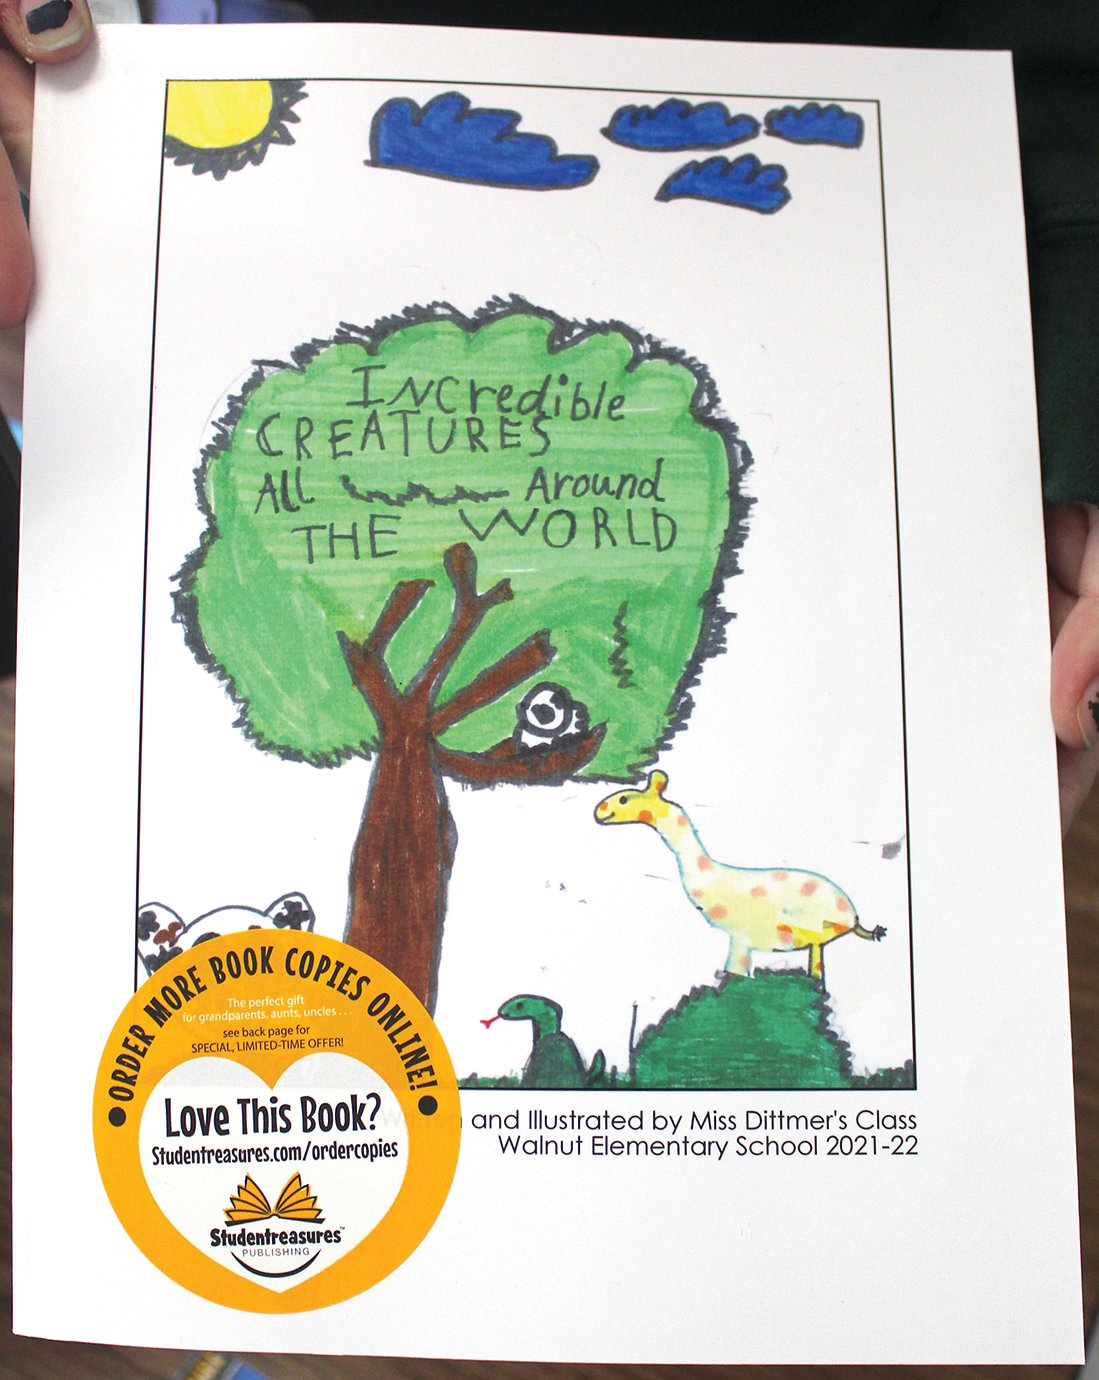 The cover of the book, which features the title “Incredible Creatures All Around the World, includes hand-drawn sketches by the students and informational paragraphs from each in their own handwriting.